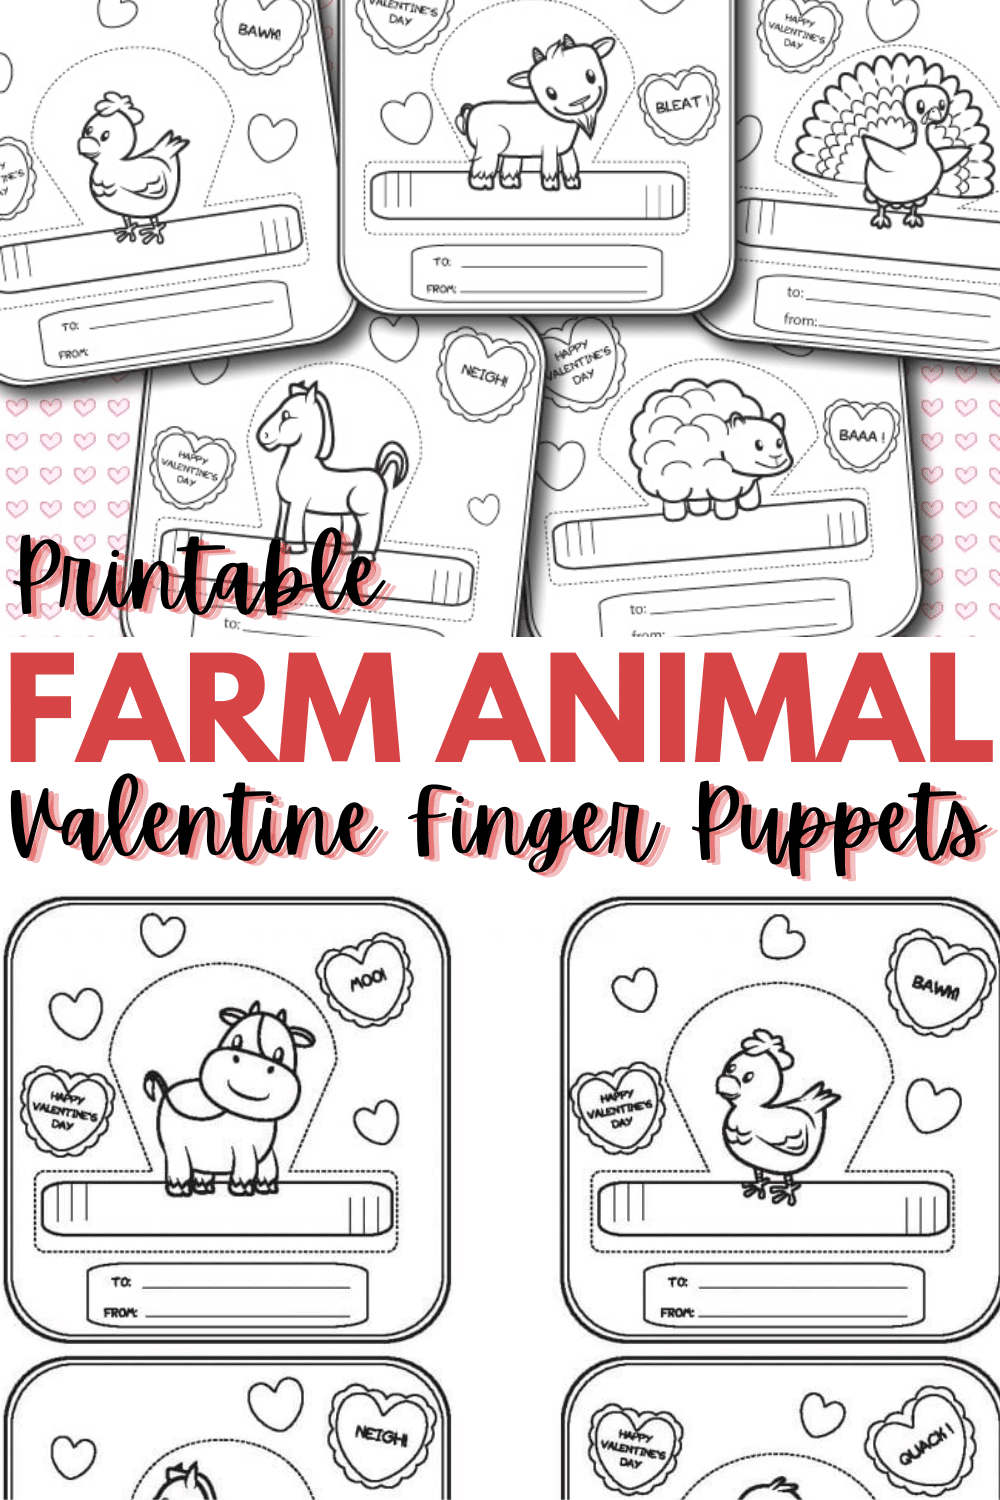 These farm animal Valentine finger puppets are adorable and so much fun for kids to decorate and play with! #printable #Valentines via @wondermomwannab